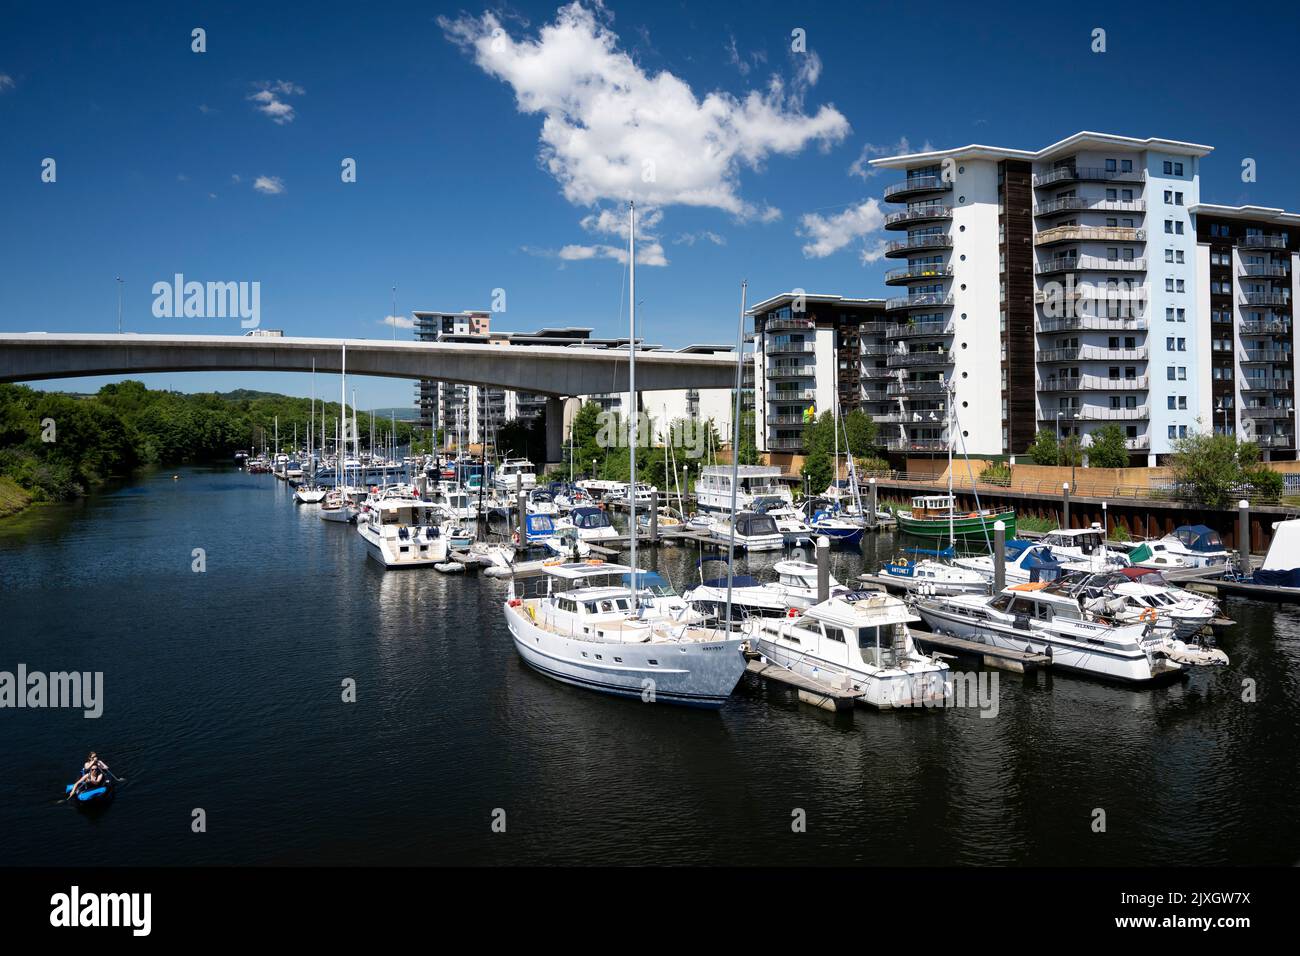 Boats against a blue sky near the Atlantic Wharf flats in the River Ely in Cardiff, Wales, United Kingdom. Stock Photo